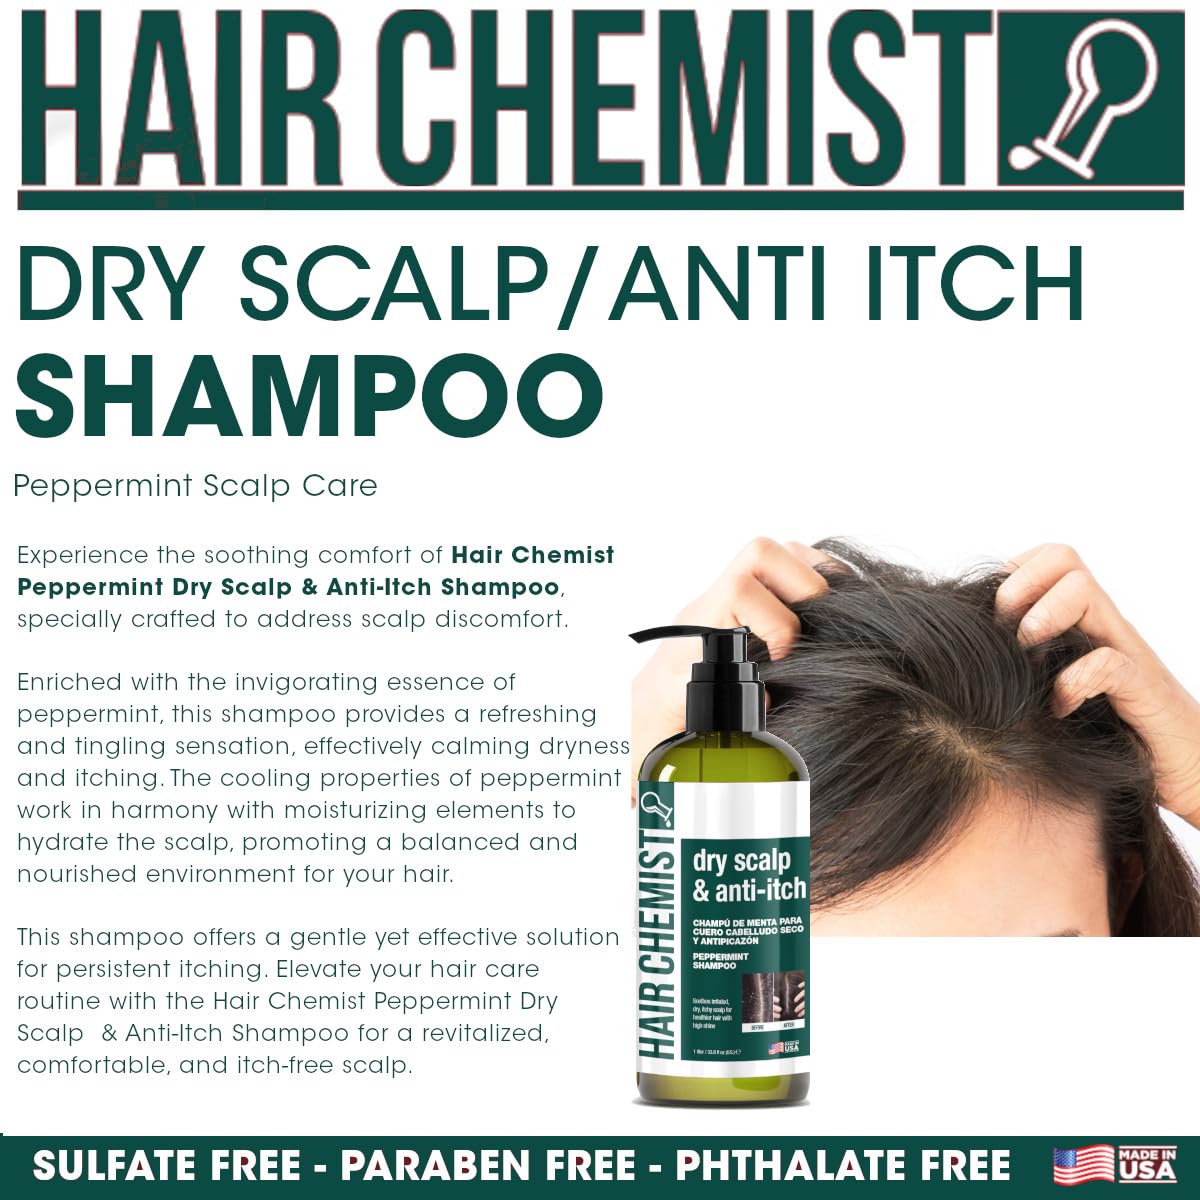 Hair Chemist Peppermint Shampoo for Dry Scalp & Anti-Itch Relief 33.8 oz. - Nourishing Formula that Soothes Irritated, Dry Scalp, Sulfate Free Shampoo Made with Natural Ingredients